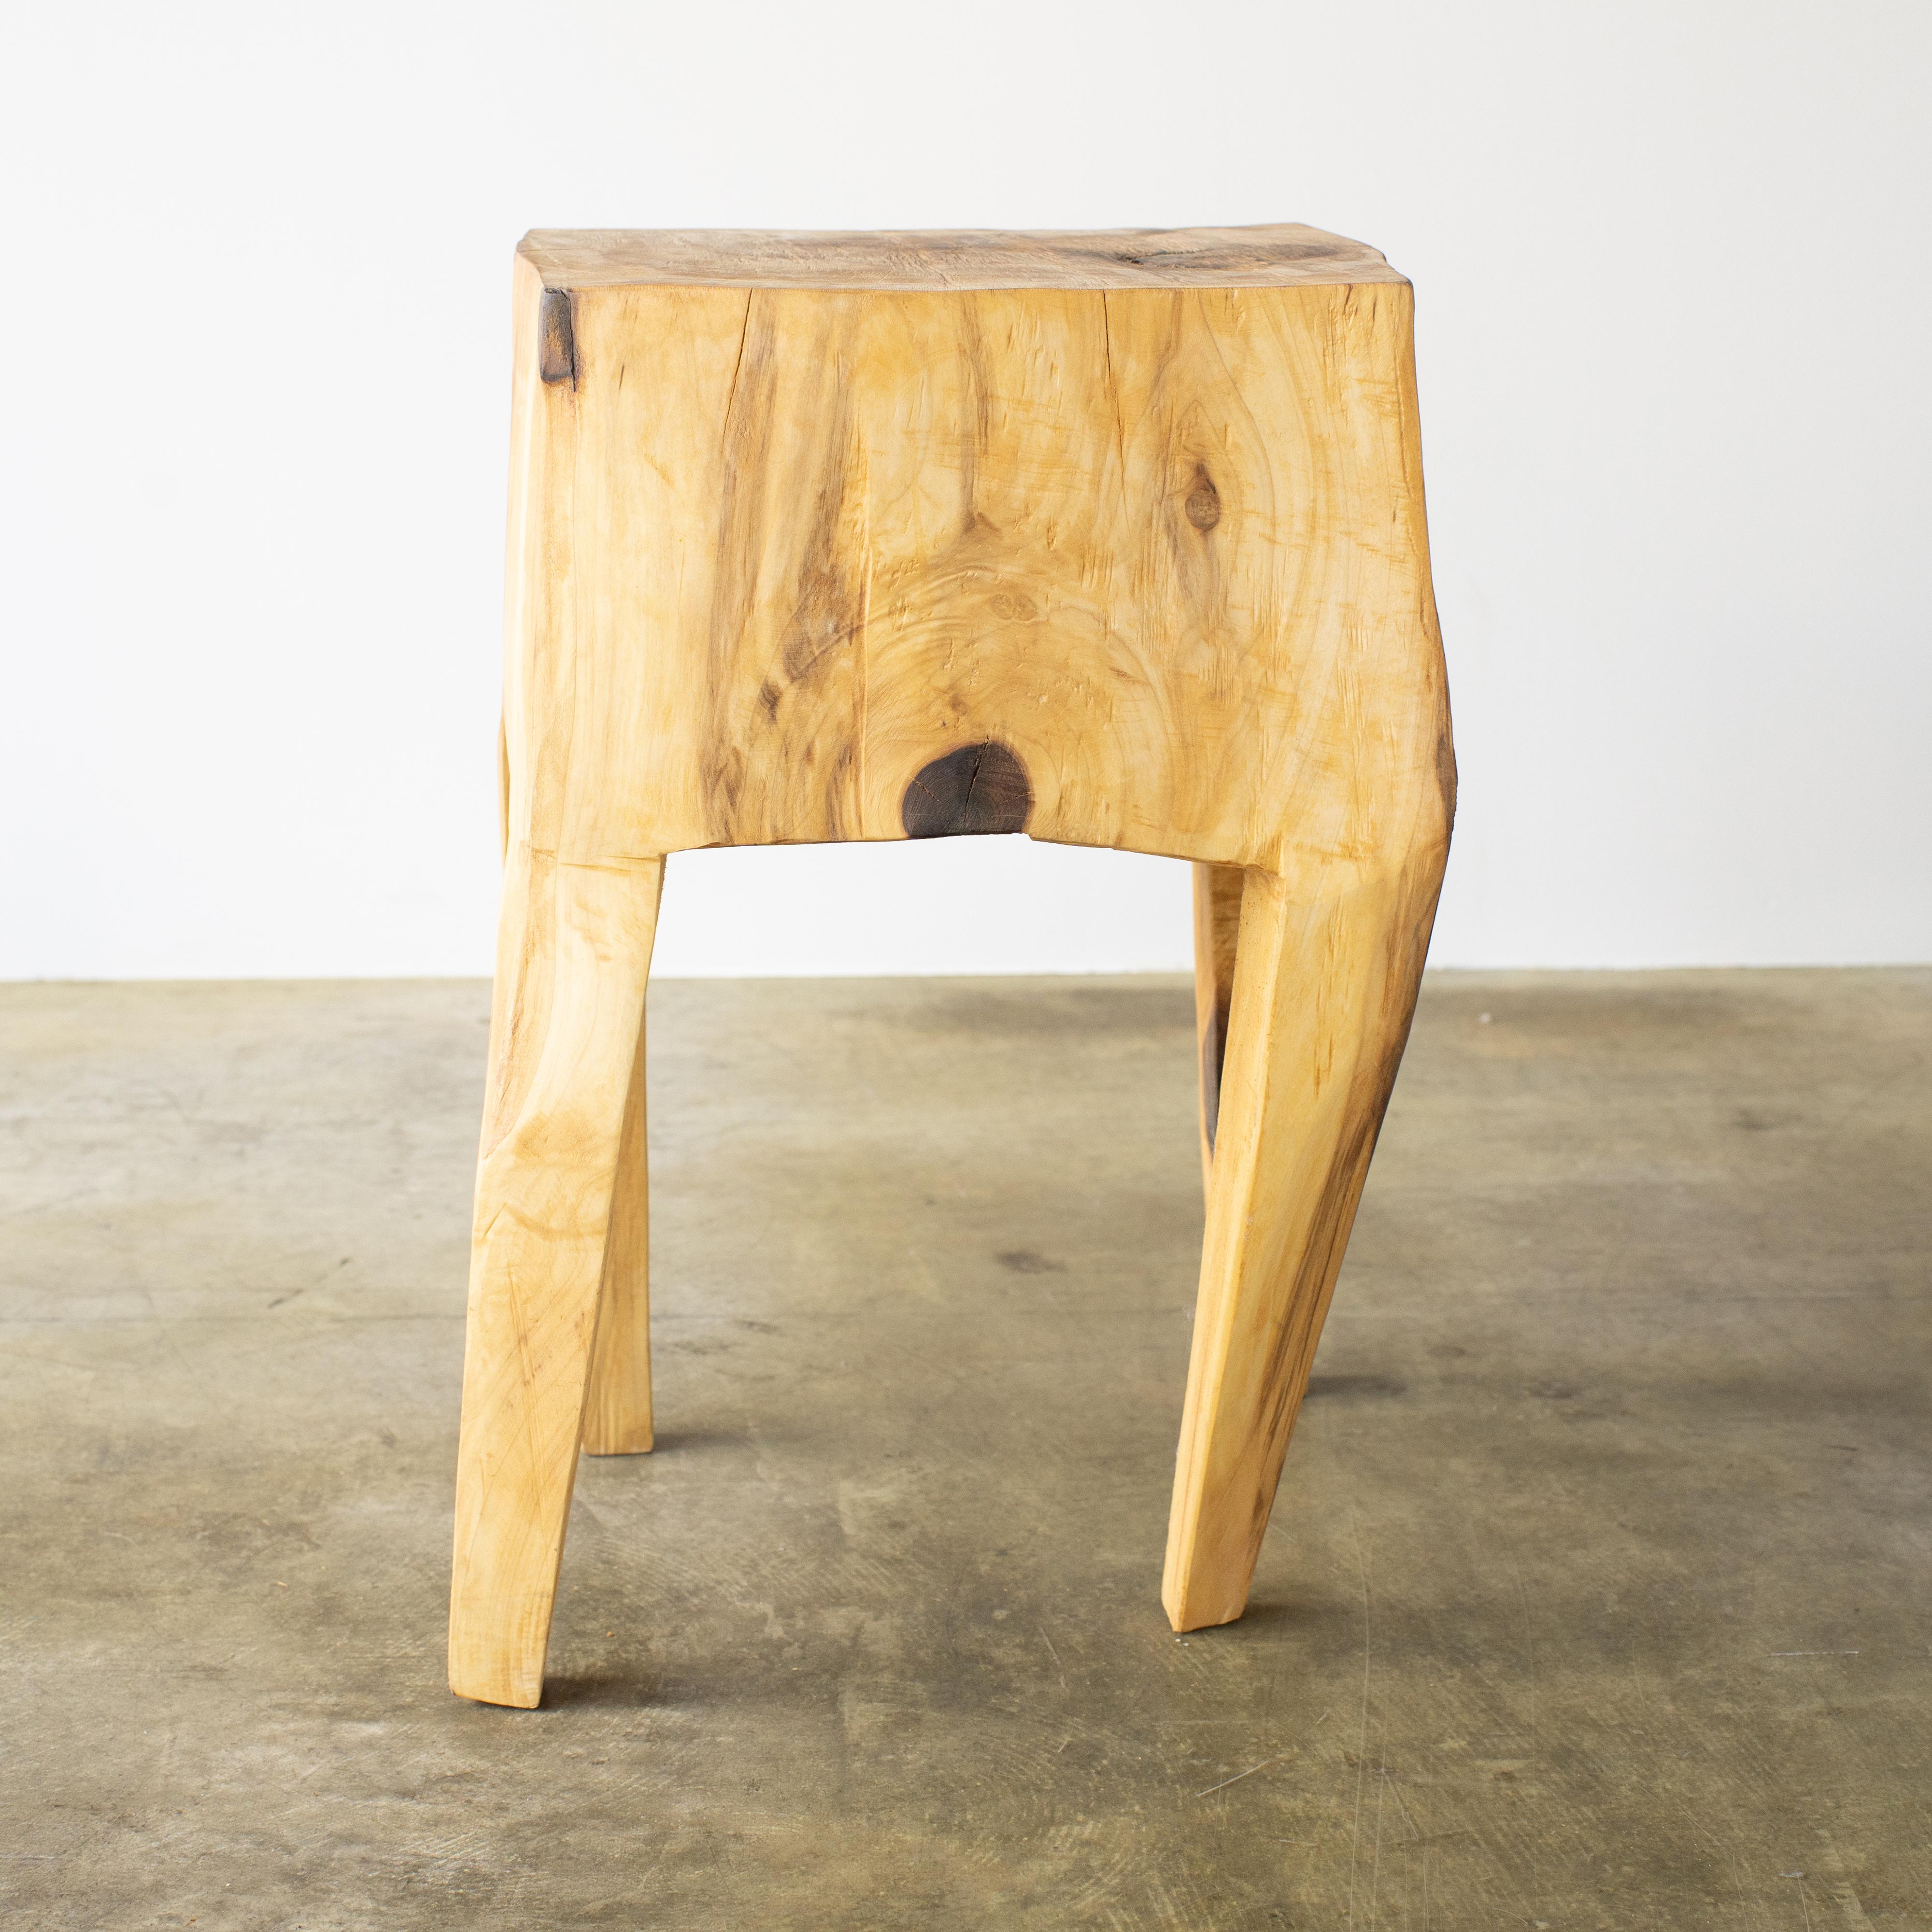 Contemporary Hiroyuki Nishimura Furniture Sculptural Wood Side Table 1 Tribal Glamping For Sale